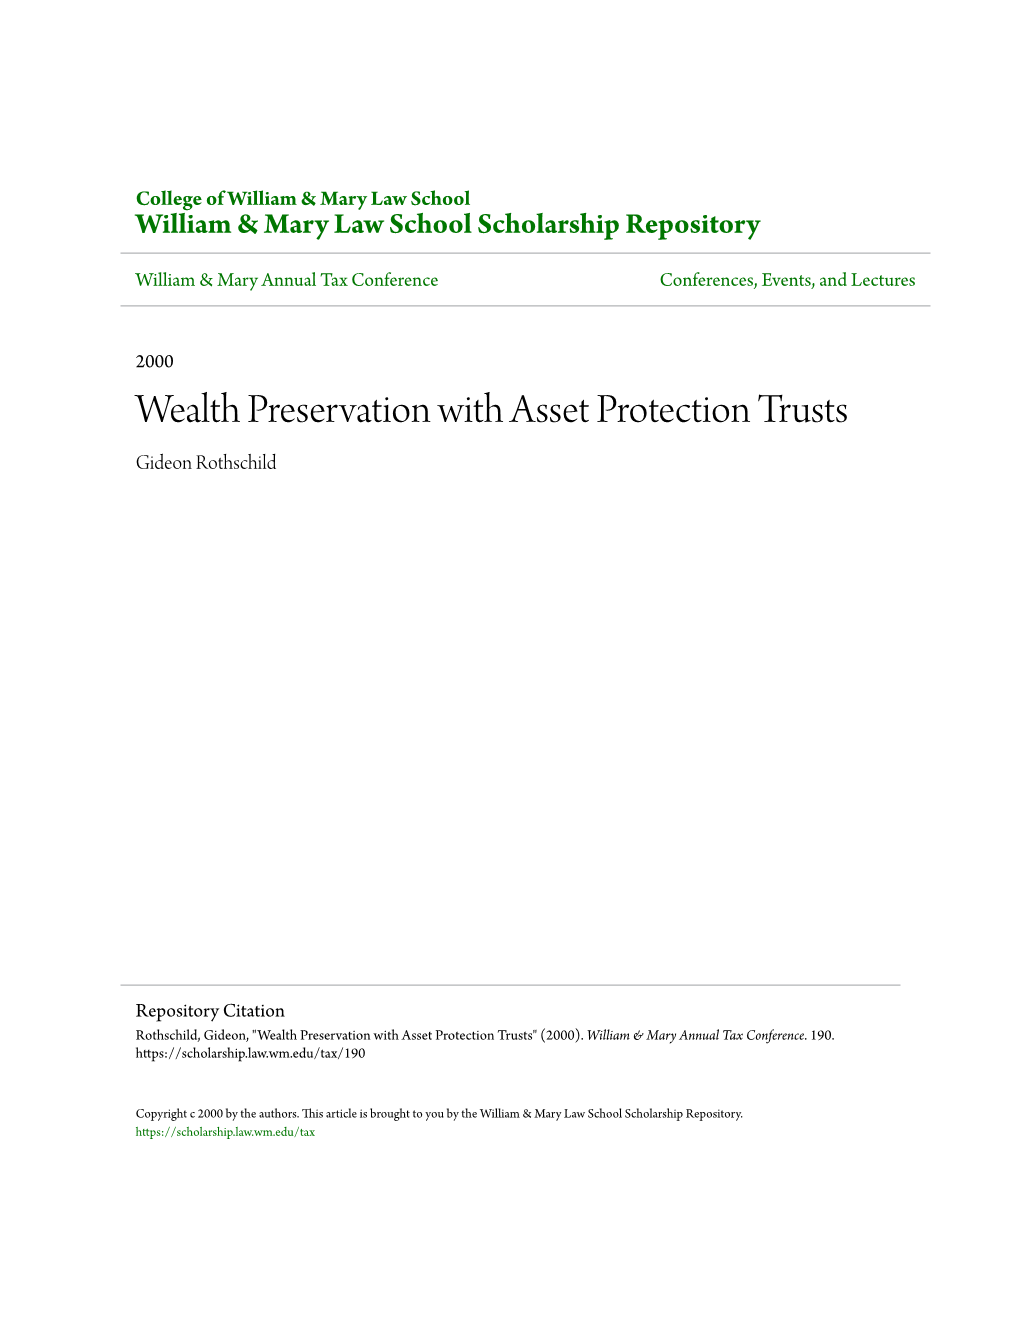 Wealth Preservation with Asset Protection Trusts Gideon Rothschild